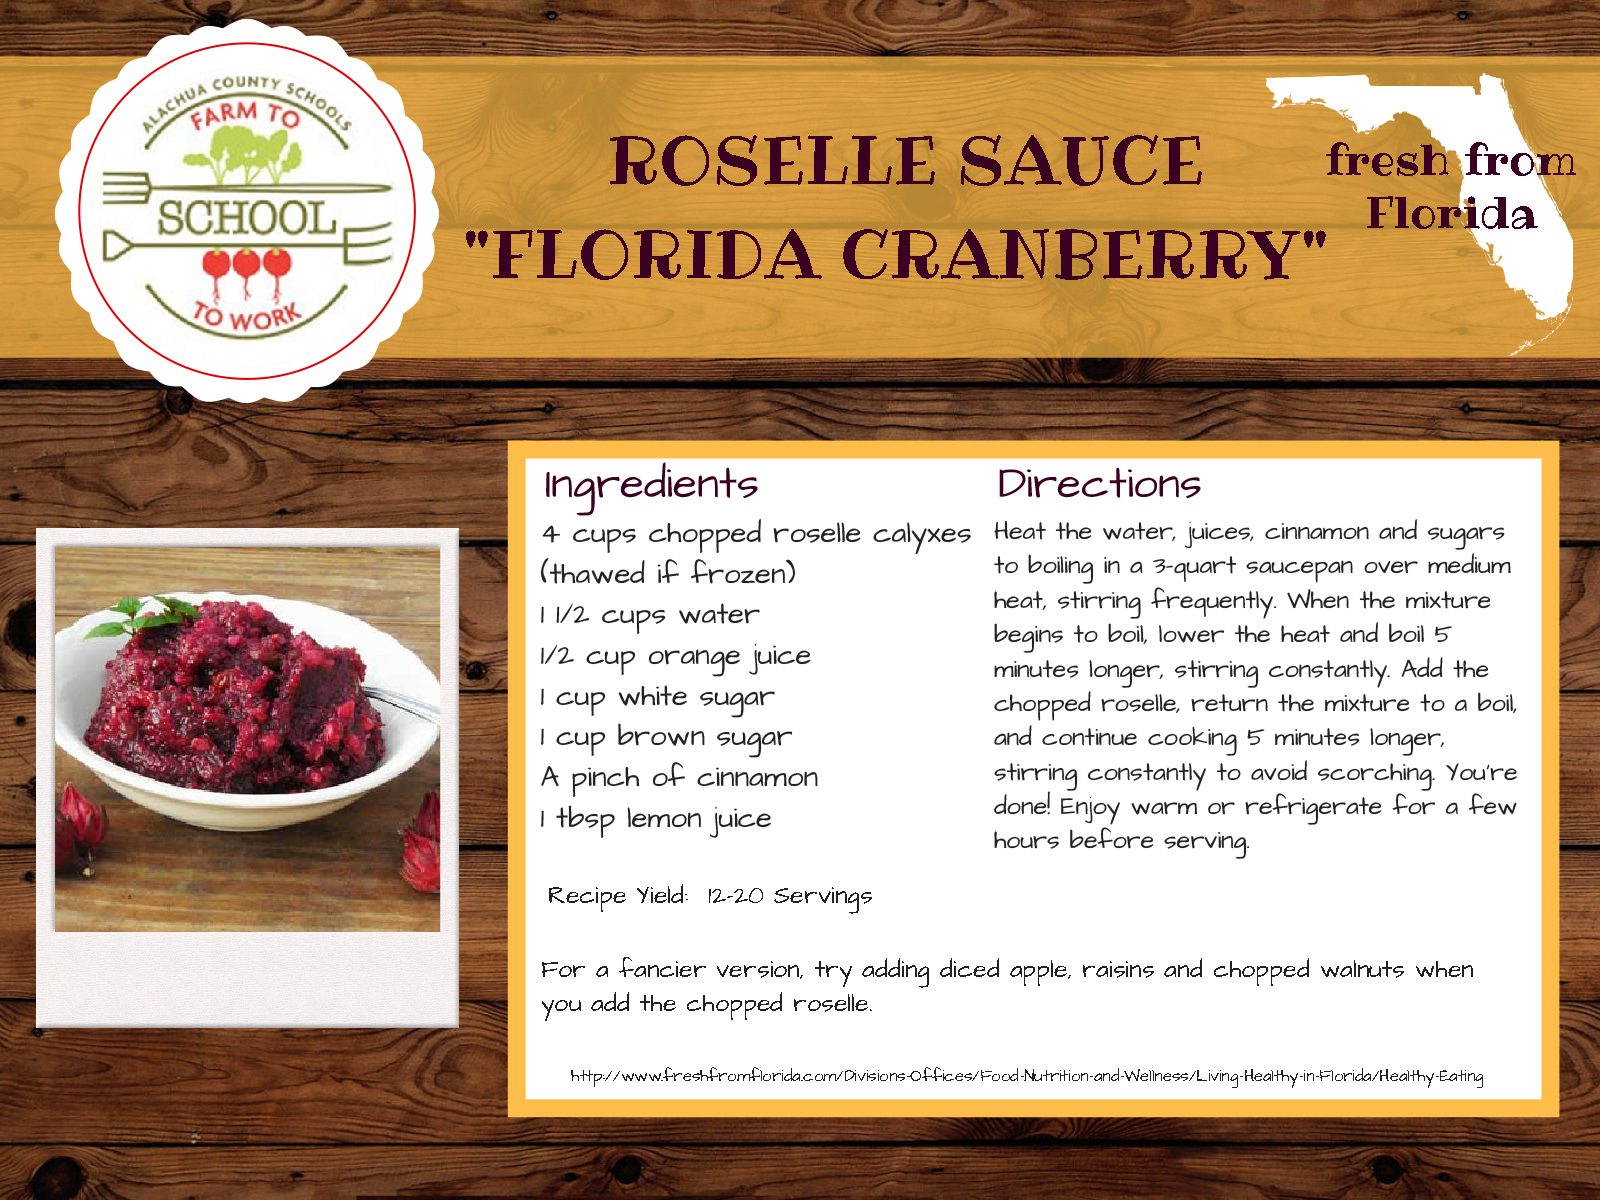 Roselle Sauce “Florida Cranberry” Recipe, Ingredients: 4 cups chopped roselle calyxes (thawed if frozen), 1 1/2 cups water, 1/2 cup orange juice, 1 cup white sugar, 1 cup brown sugar, A pinch of cinnamon, 1 tablespoon of lemon juice. Heat the water Juices, cinnamon and sugars to boiling in a 3-quart saucepan over medium heat, stirring frequently. When the mixture begins to boil, lower the heat and boil 5 minutes longer, stirring constantly. Add the chopped roselle, return the mixture to a boil, and continue cooking 5 minutes longer, stirring constantly to avoid scorching. You’re done! Enjoy warm or refrigerate for a few hours before serving. Recipe yields 12 to 20 servings. For a fancier version, try adding diced apples, raisins, and chopped walnuts when you add the chopped roselle. Recipe from http://www.freshfromflorida.com/Divisons-Offices/Food-Nutrition-and-Wellness/Living-Healthy-in-Florida/Healthy-Eating